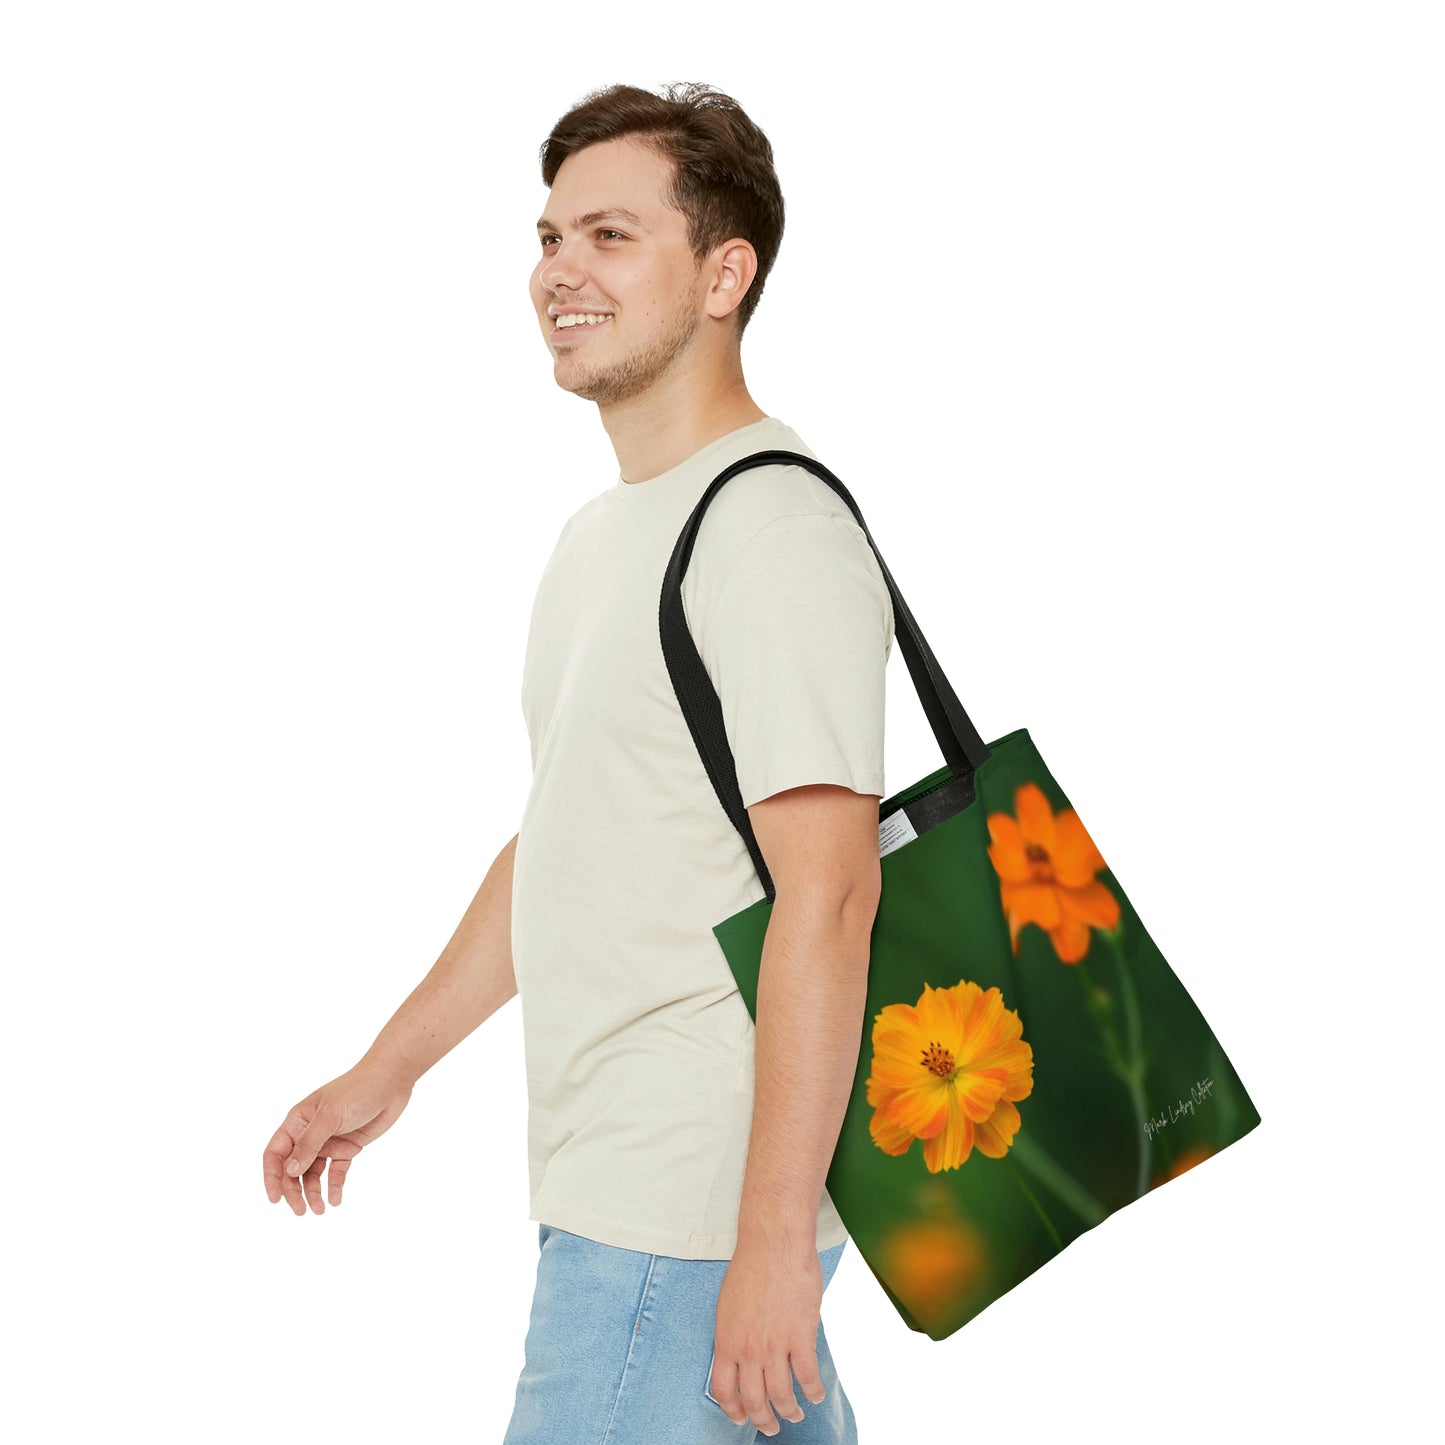 Floral Beauty Art Tote